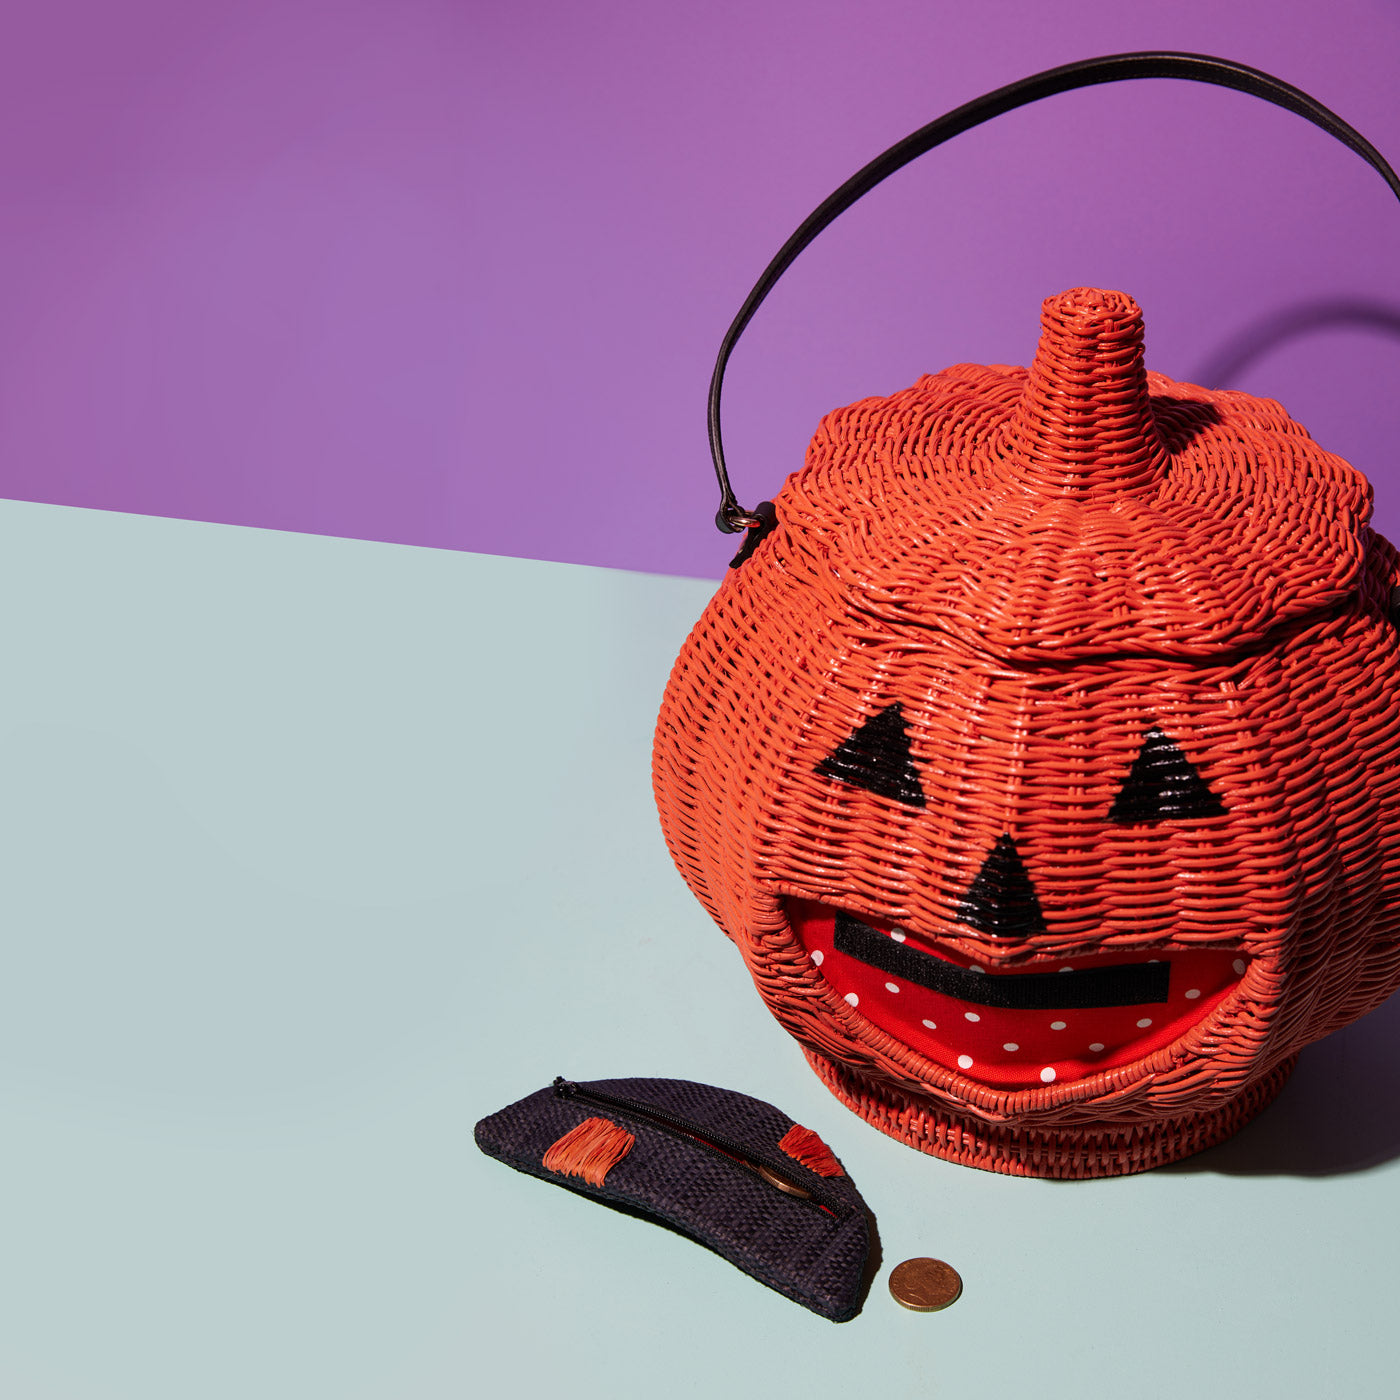 Wicker Darling's Jack the Lantern the jack-o’-lantern purse with coin purse 